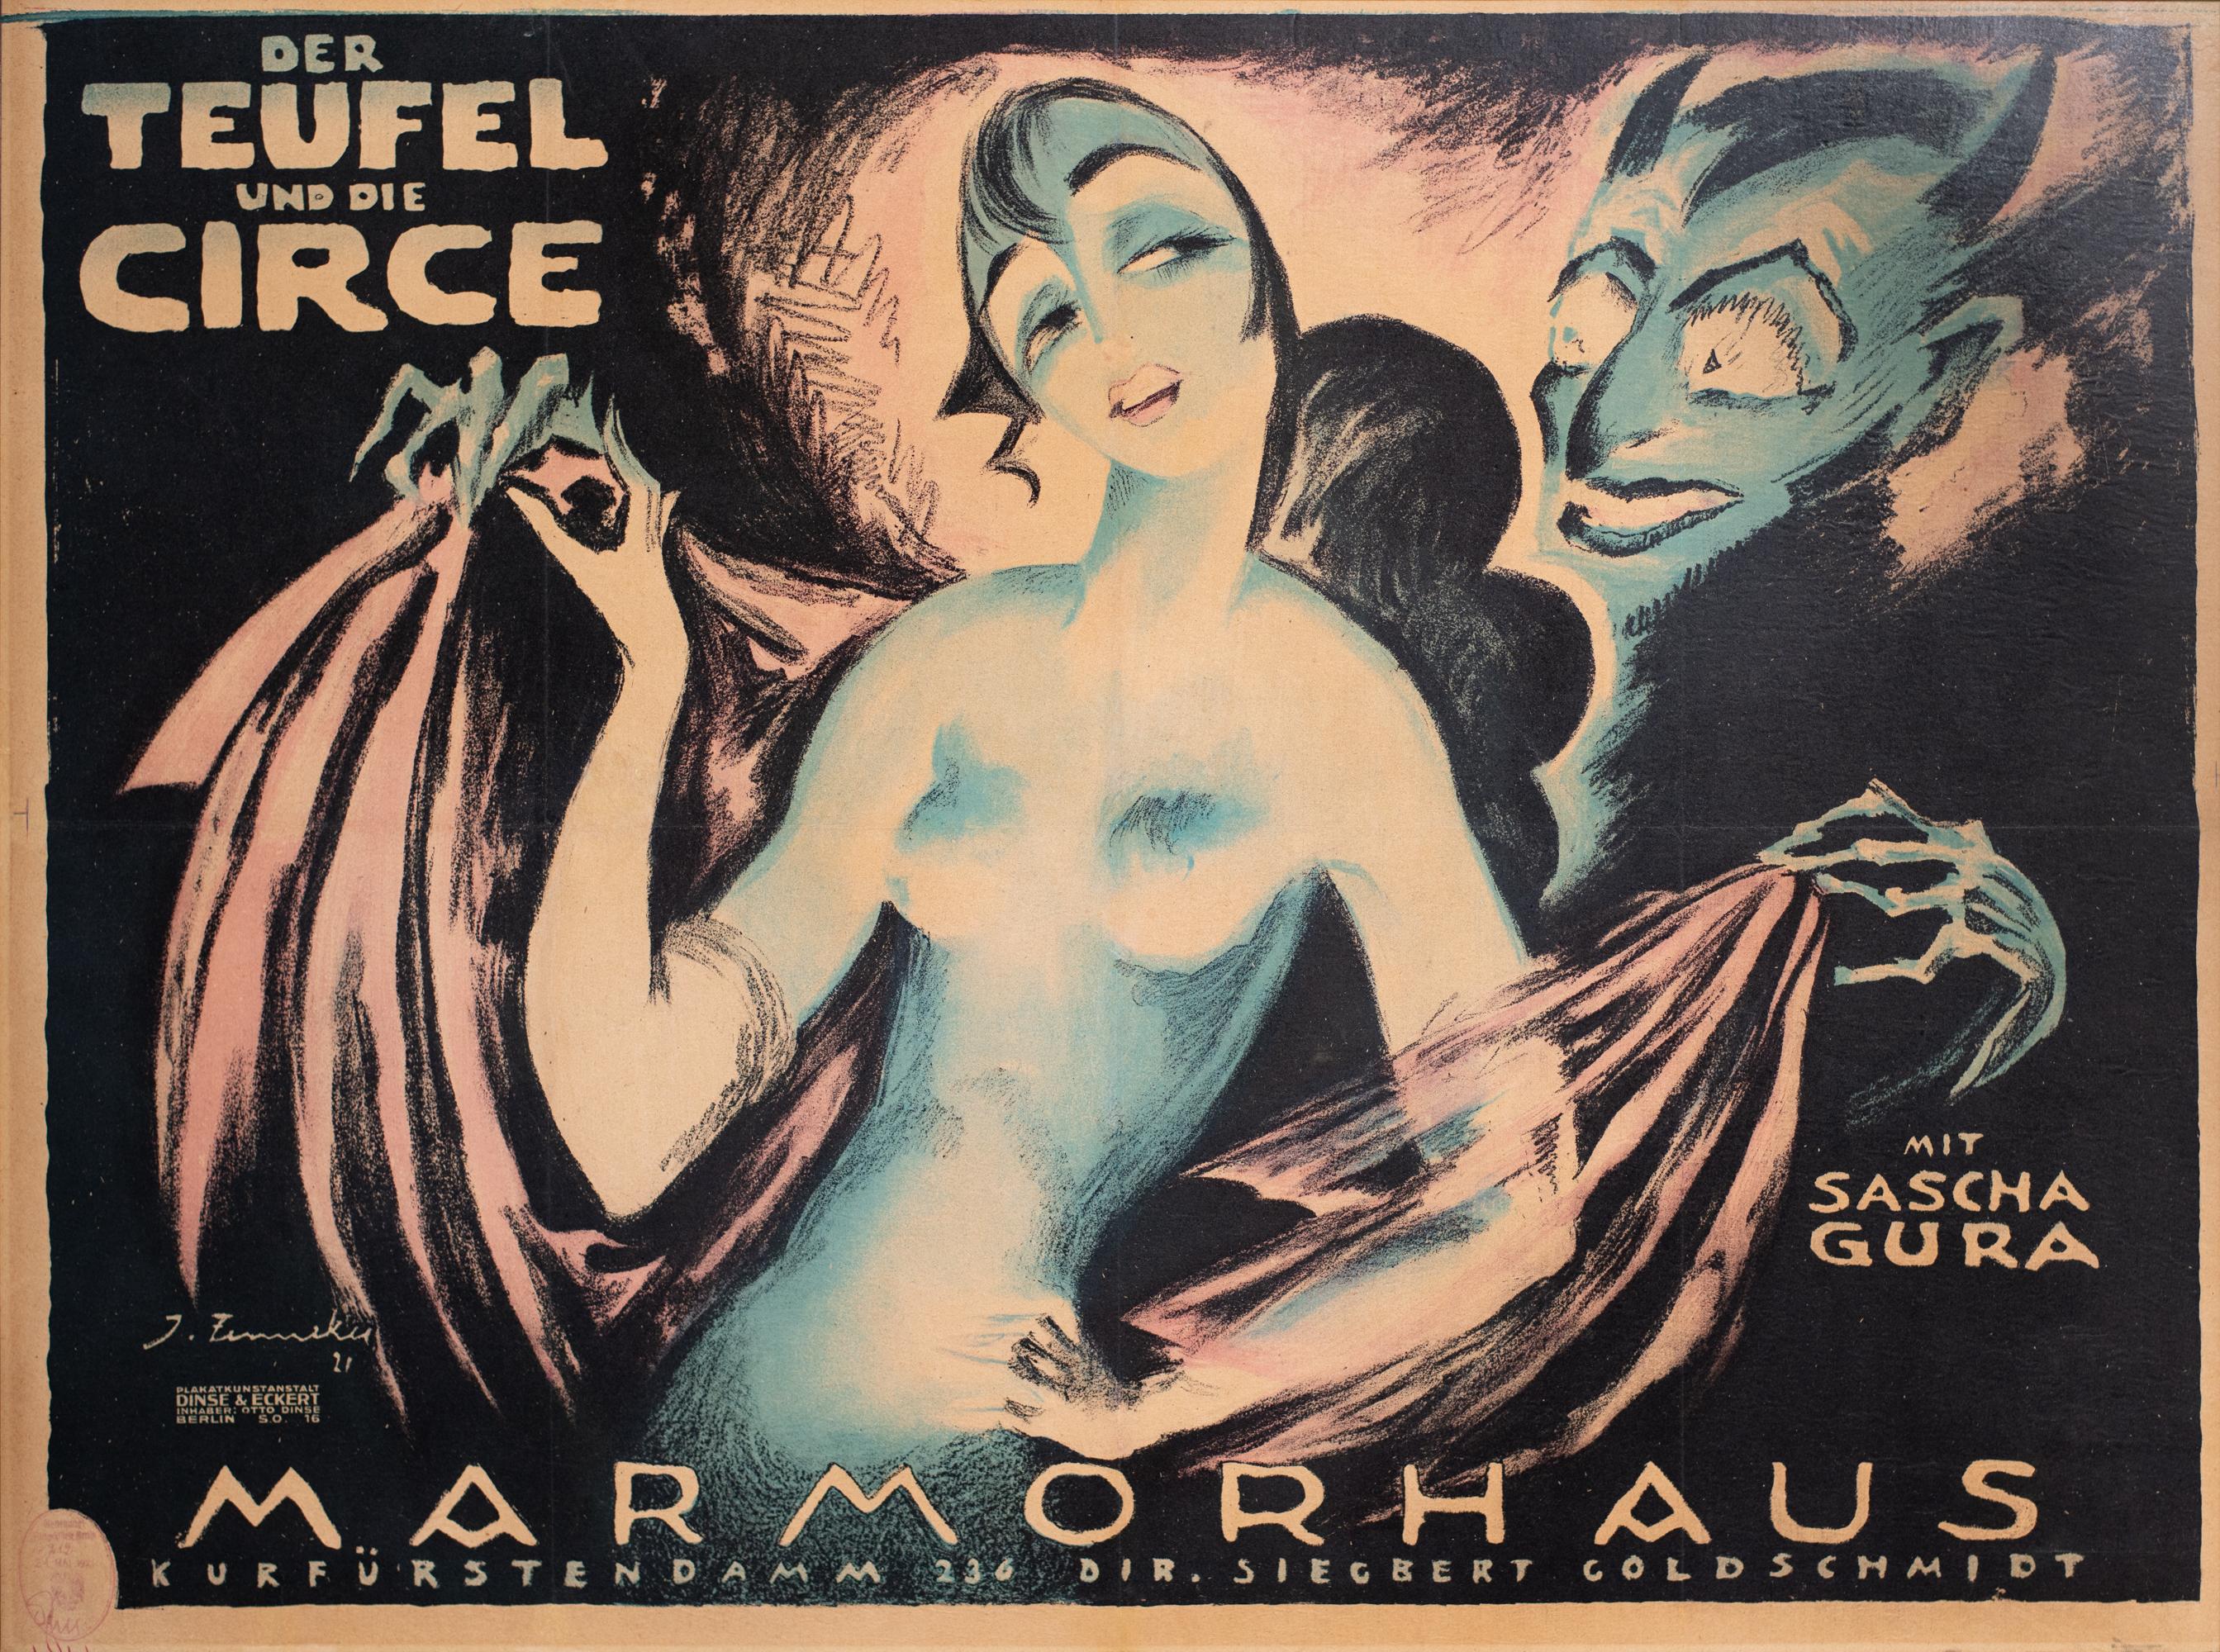 The painter, graphic artist, production and set designer, Josef Fenneker, is one of the most important representatives of artistic film posters of the 1910s and 1920s. He was commissioned primarily by Berlin’s Marmorhaus cinema, which was located on